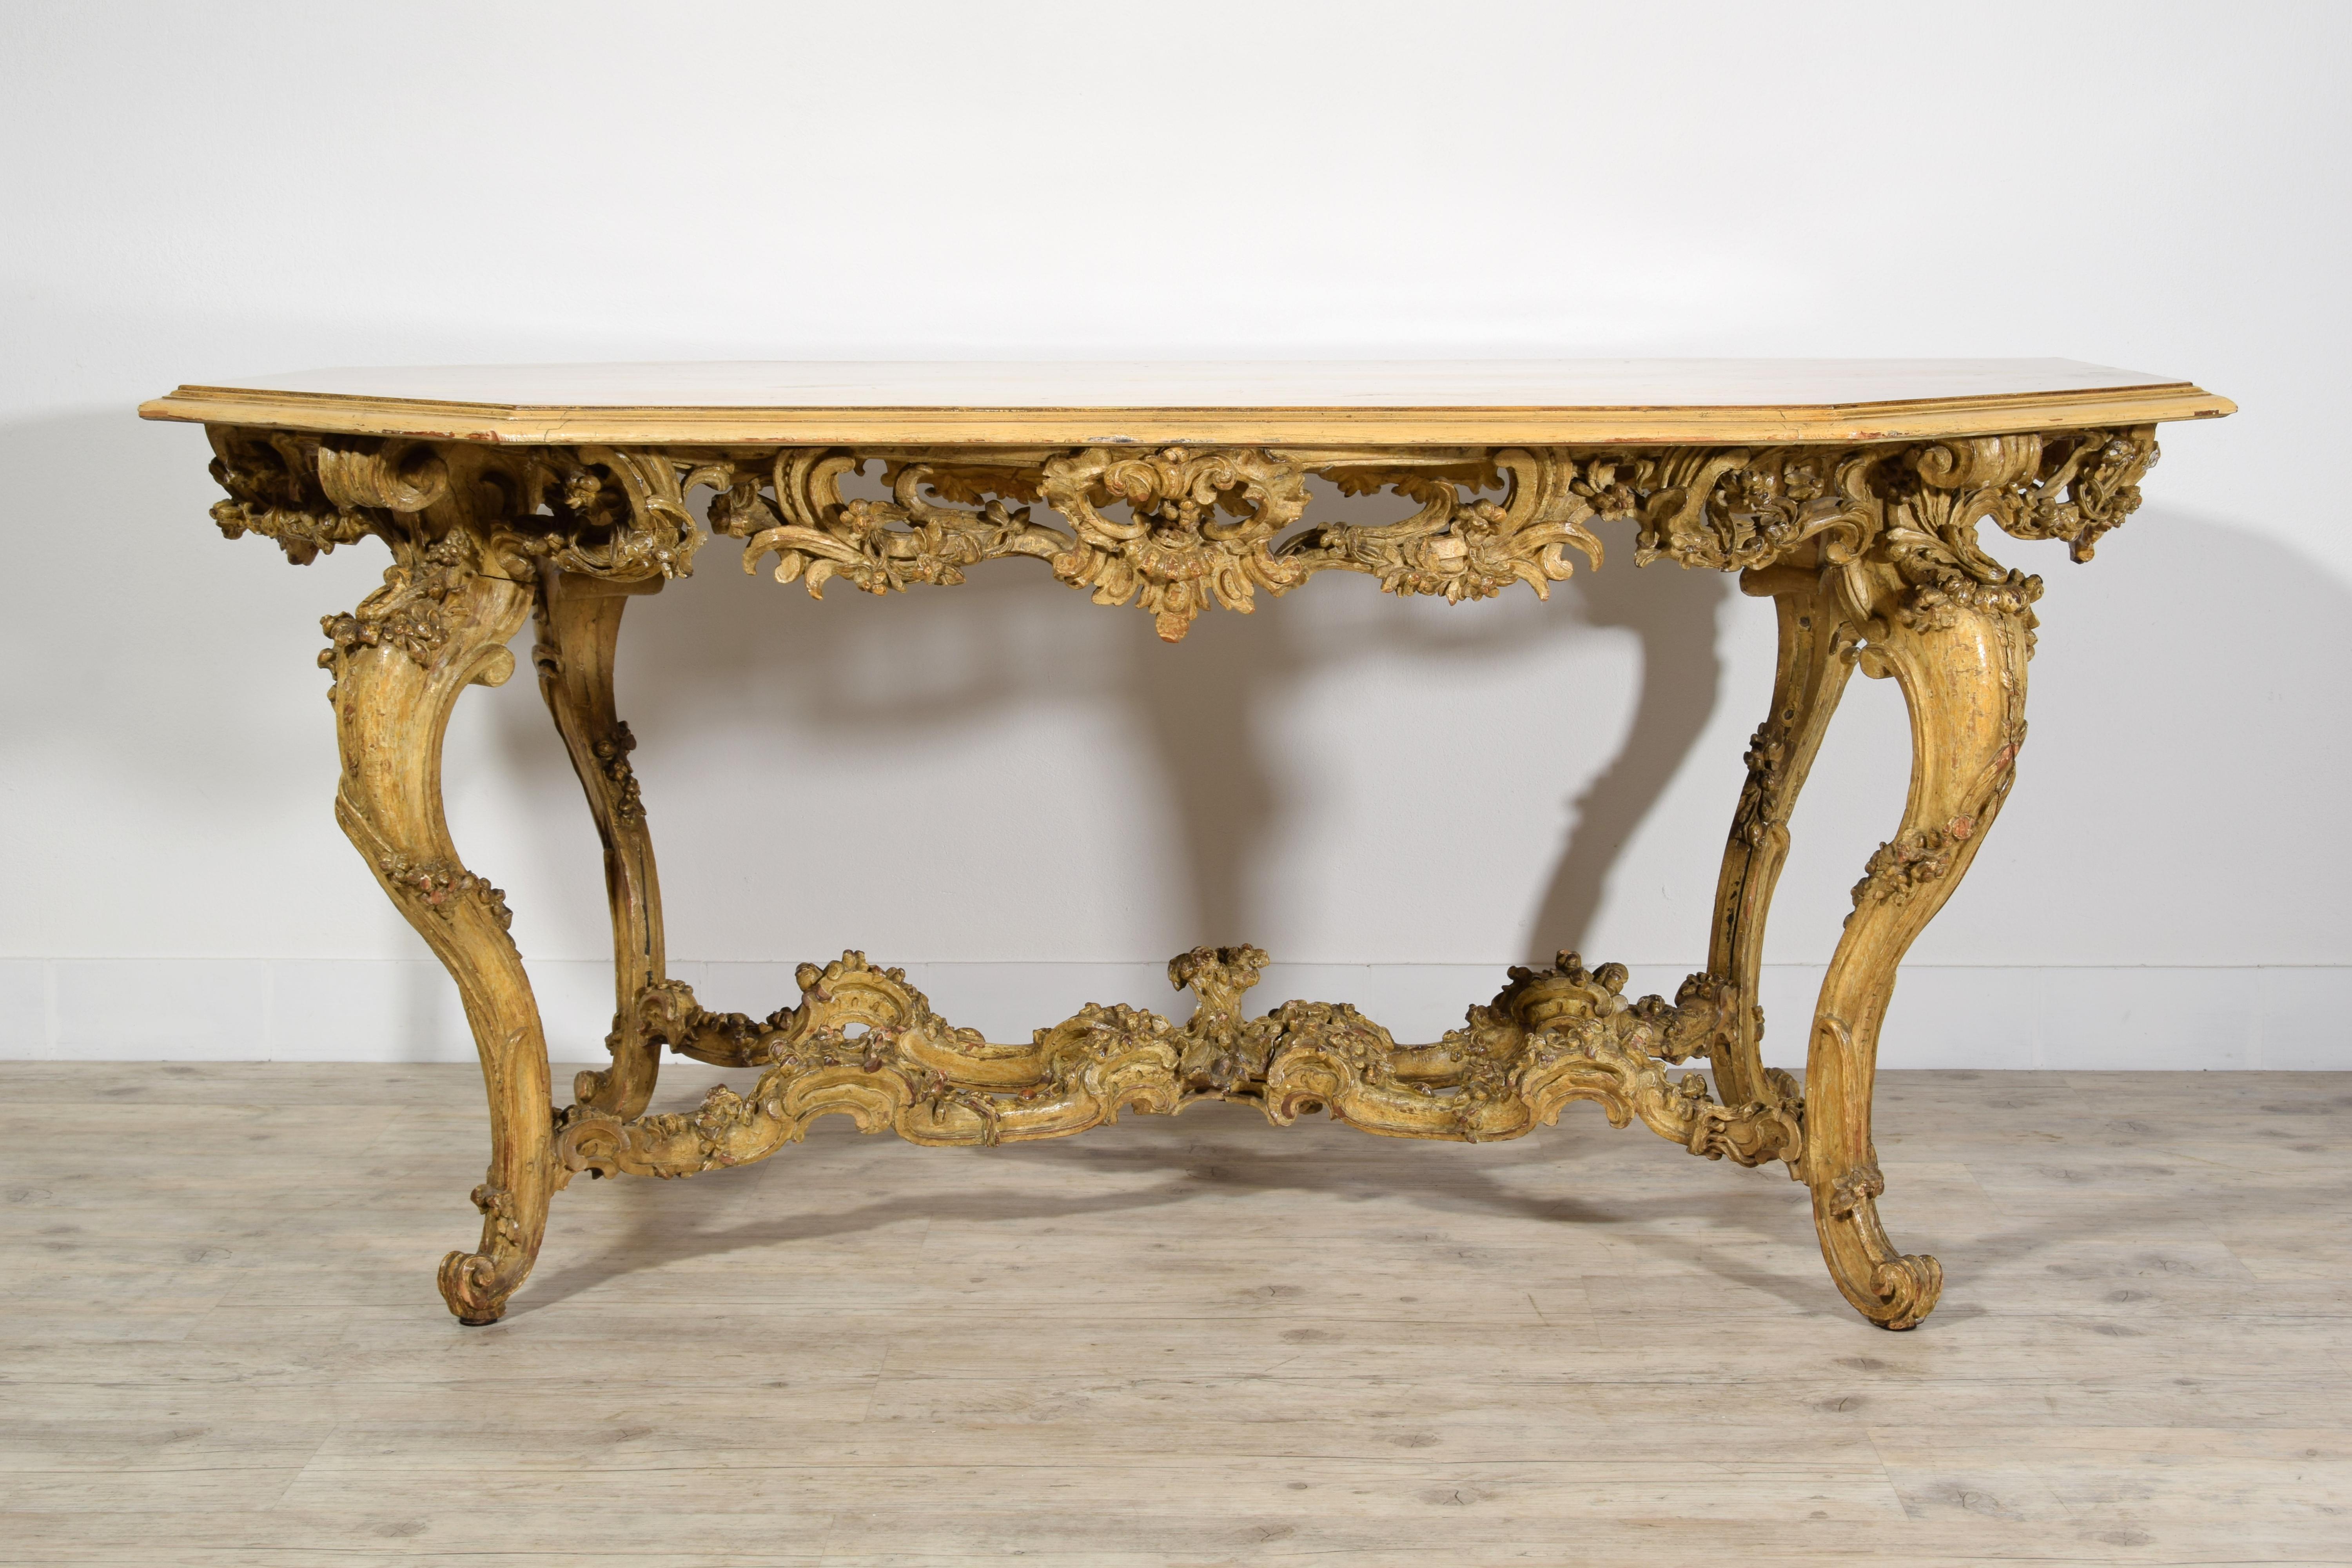 Italian Baroque Carved Gilt and Lacquered Wood Center Table, 18th Century 2